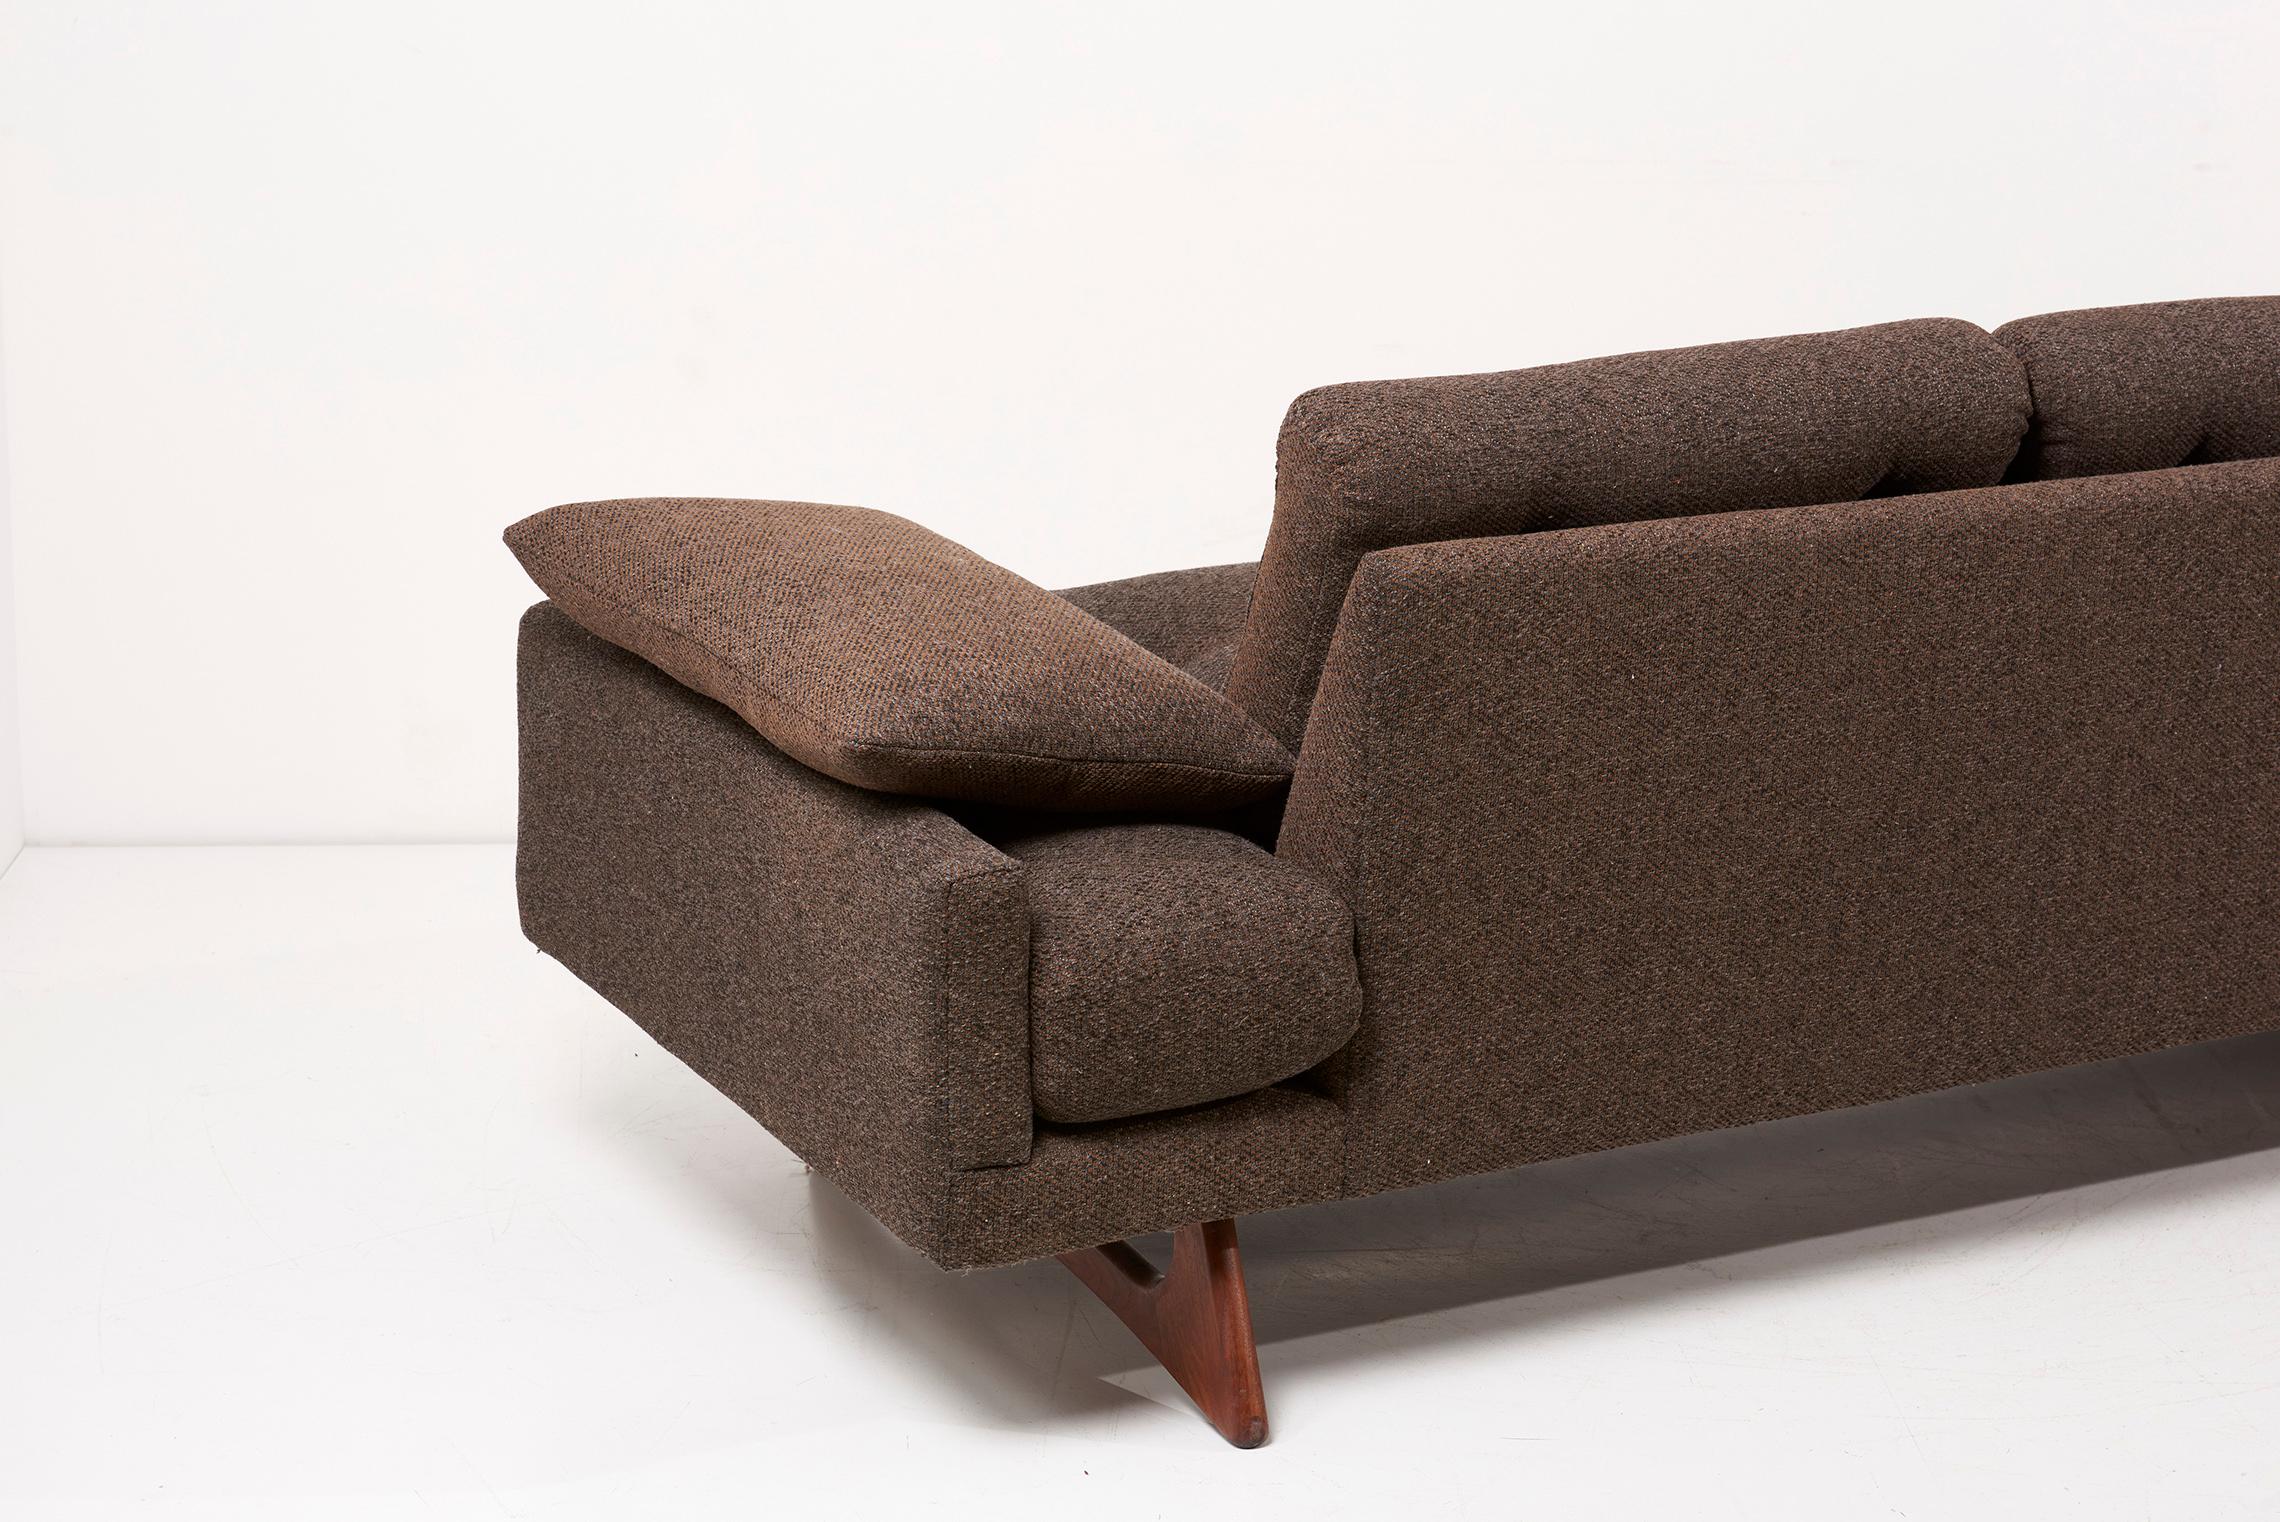 Mid-20th Century Adrian Pearsall 'Gondola Sofa' in Brown Fabric for Craft Associates, USA, 1950s For Sale